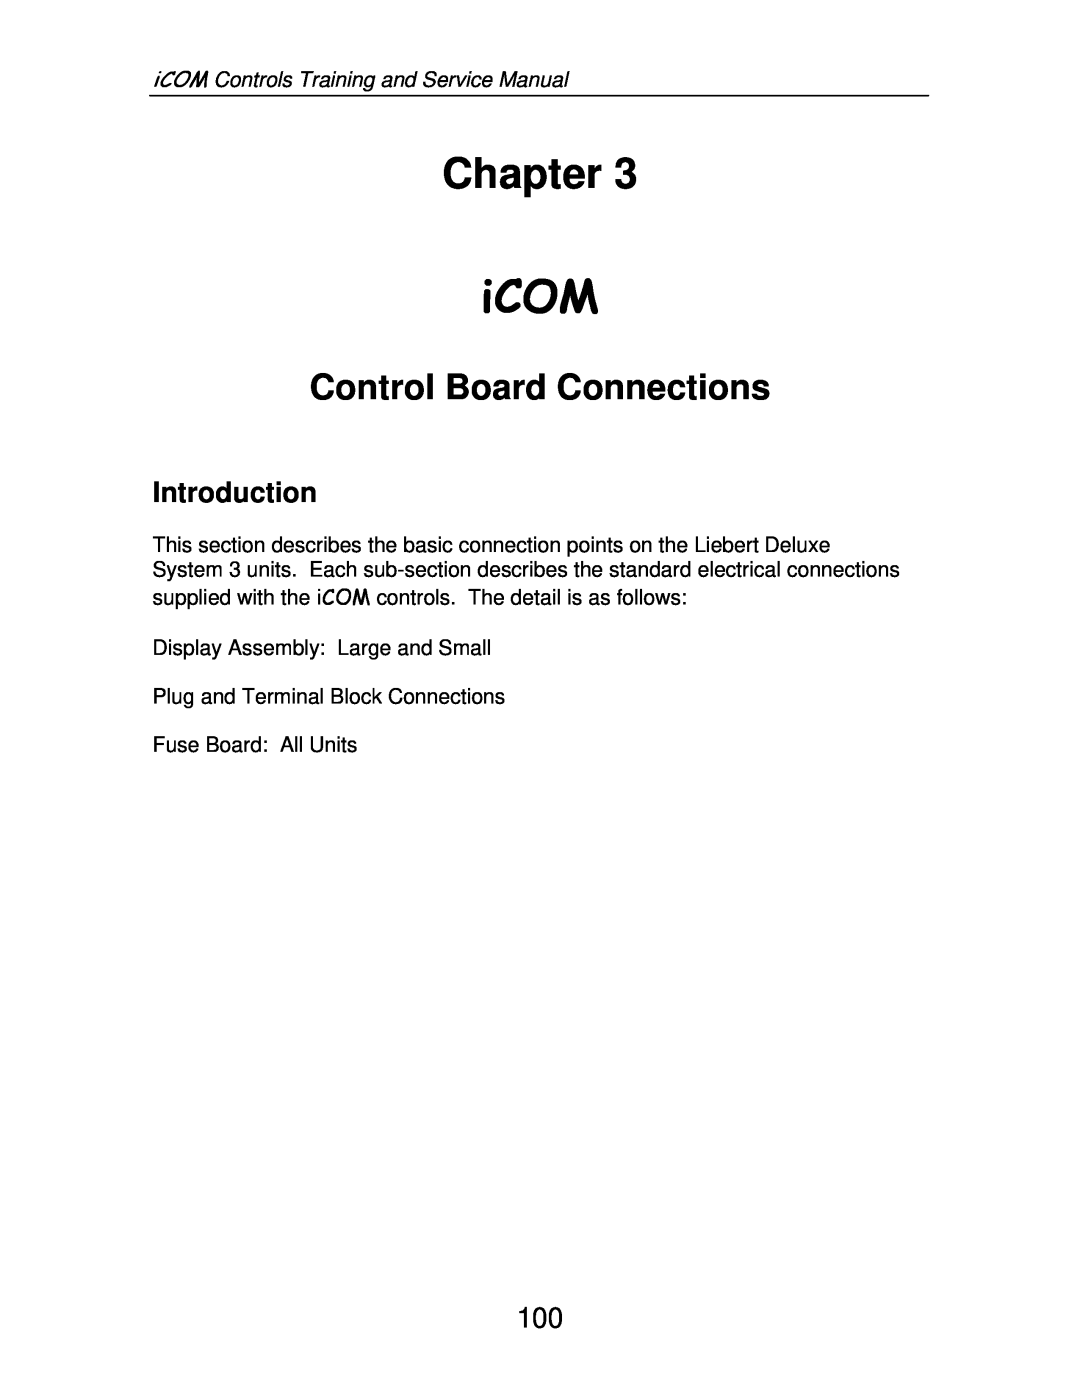 Liebert TM-10098 Chapter, Control Board Connections, Introduction, iCOM Controls Training and Service Manual 